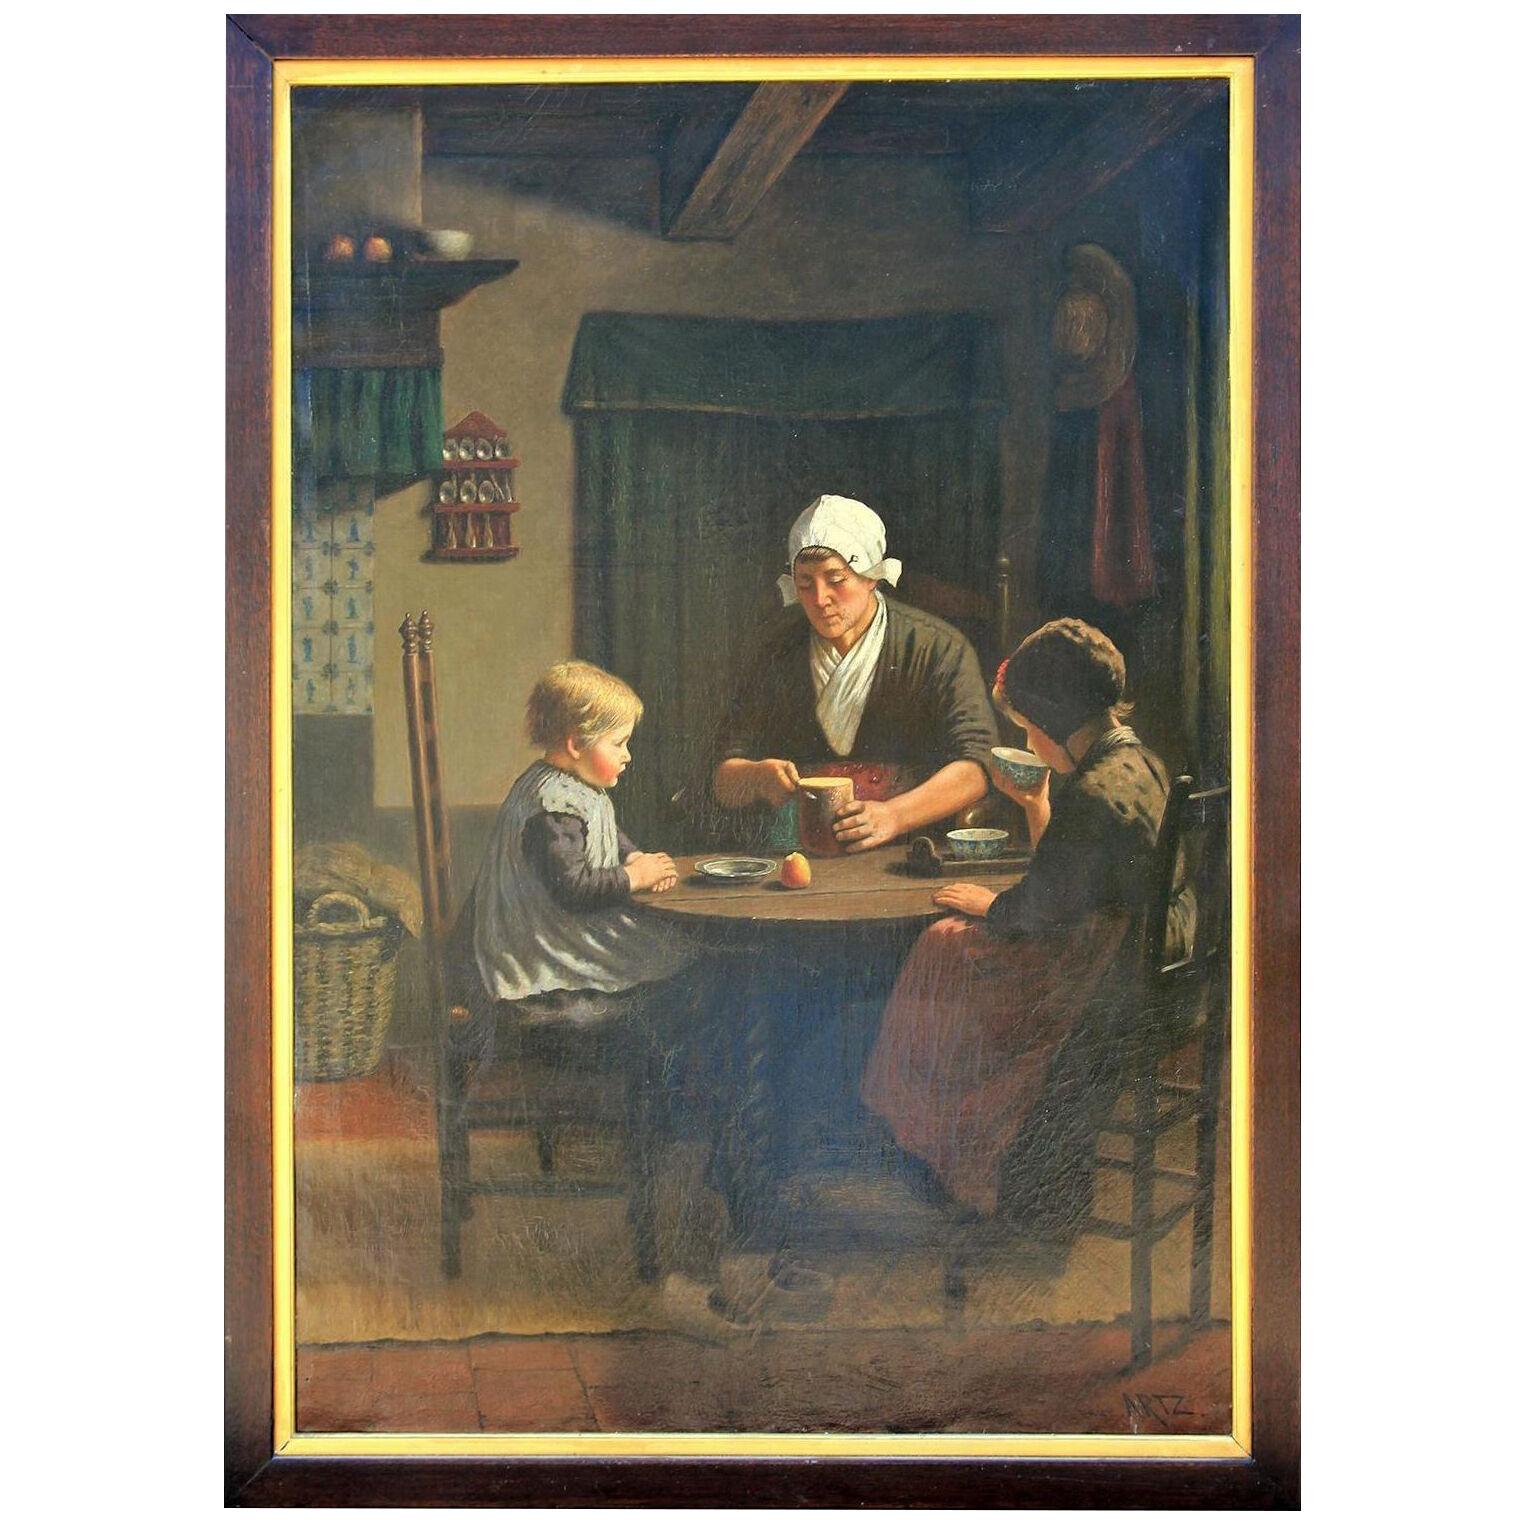 "Midday Meal" Replica Portrait In the style of David Adolf Constant Artz